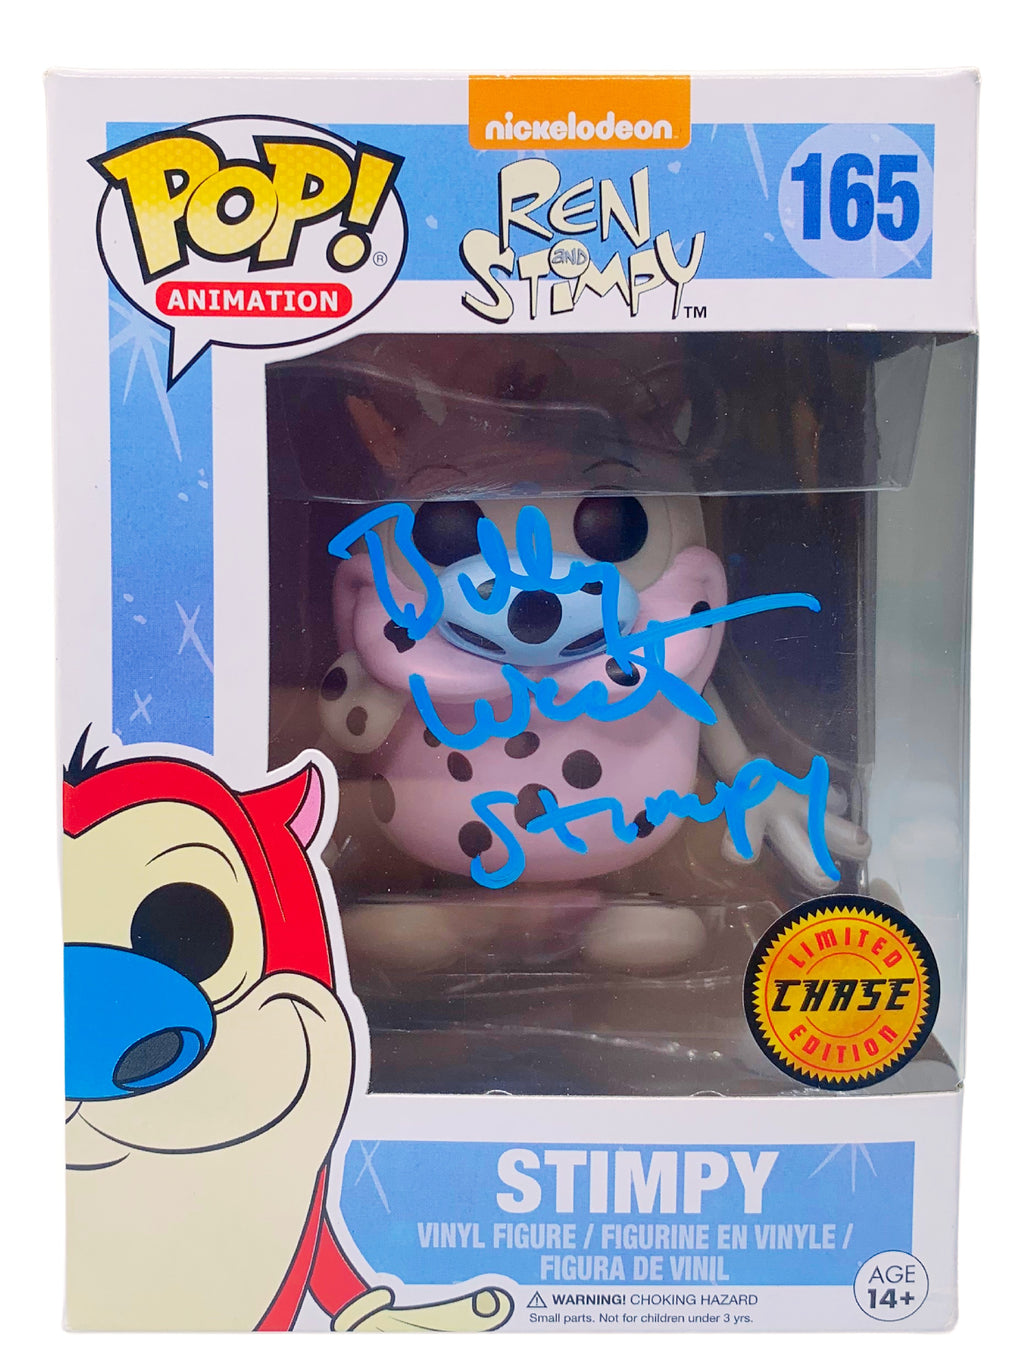 Billy West autographed signed inscribed Funko Pop JSA COA The Ren & Stimpy Show